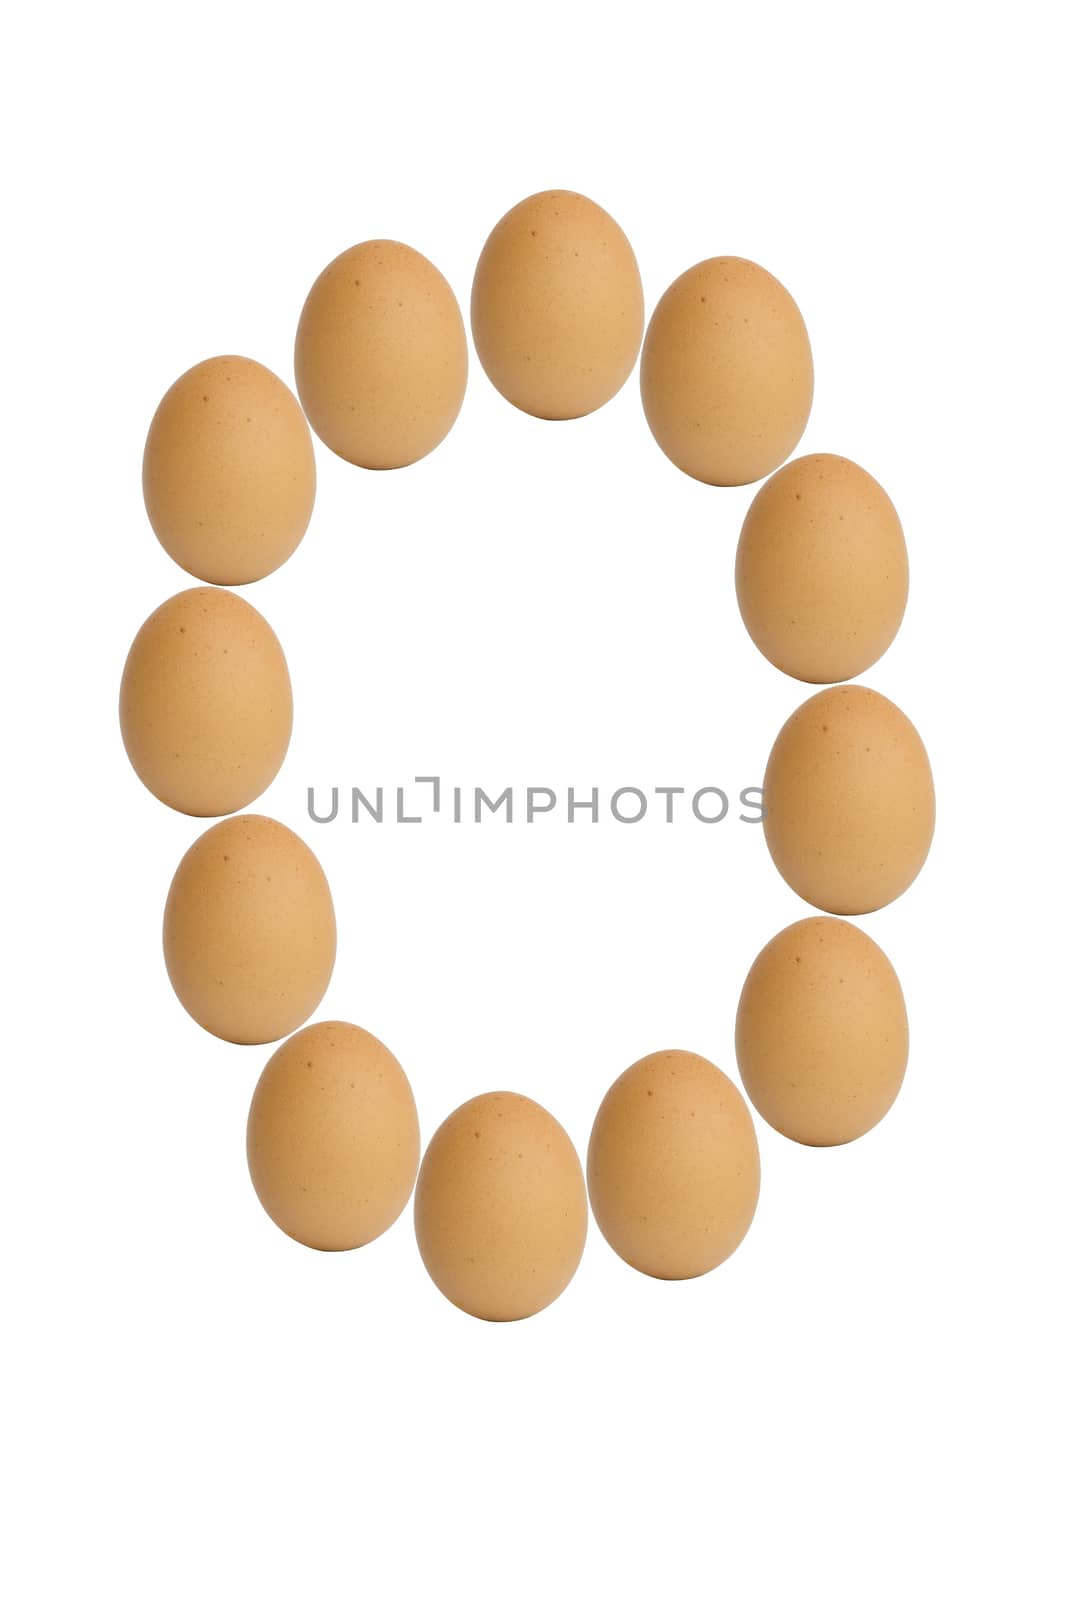 Number 0 to 9 from brown eggs alphabet isolated on white background, zero